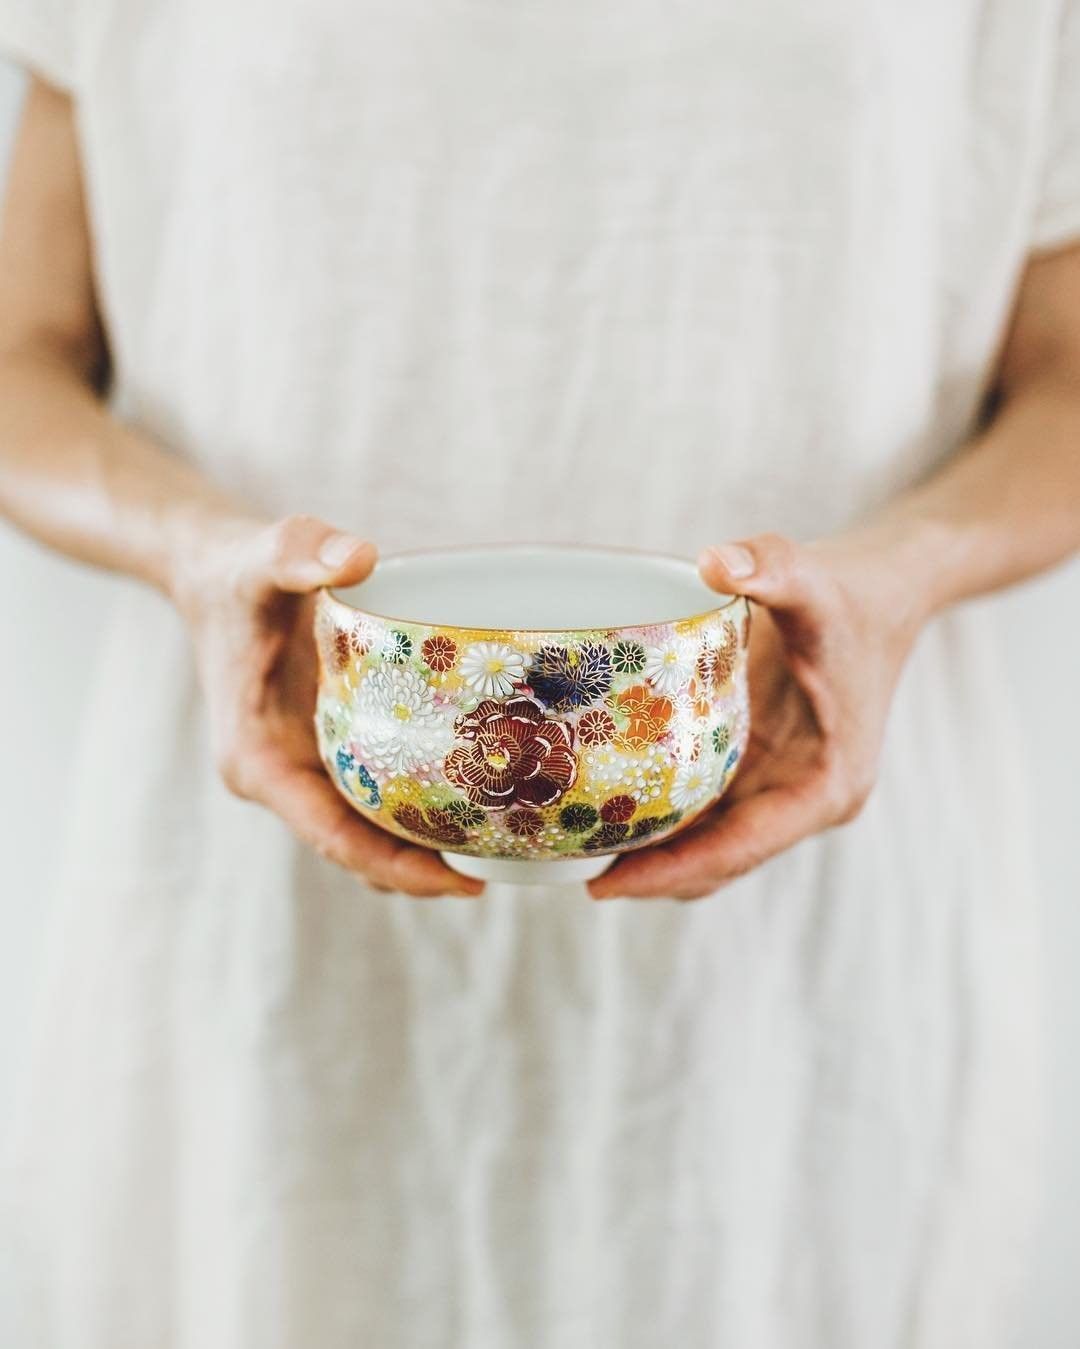 Hands holding decorative bowl. Photo by Instagram user @romanalilic